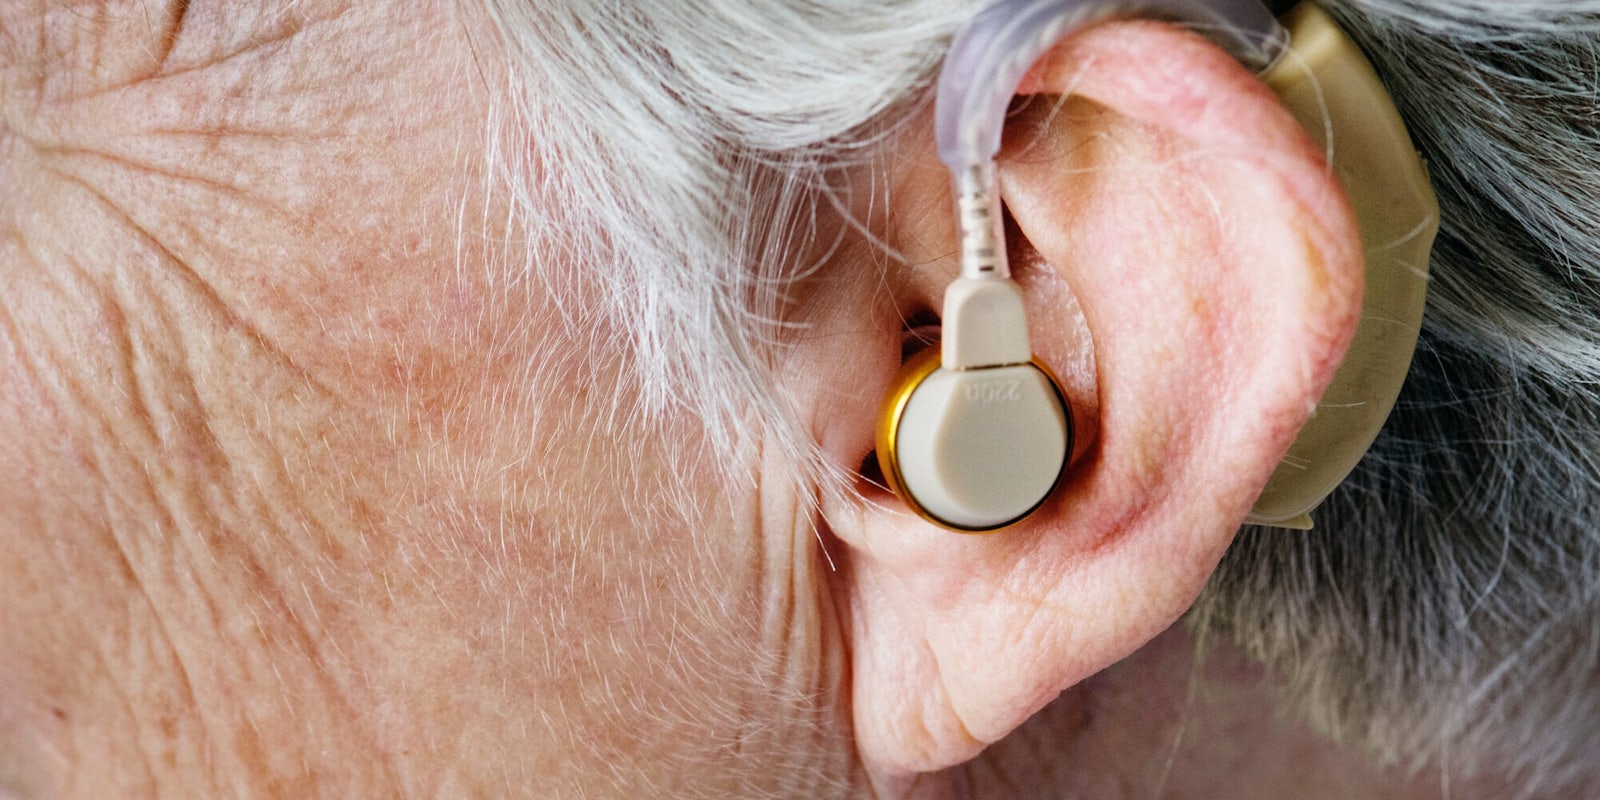 Google is creating a native hearing aid for Android.